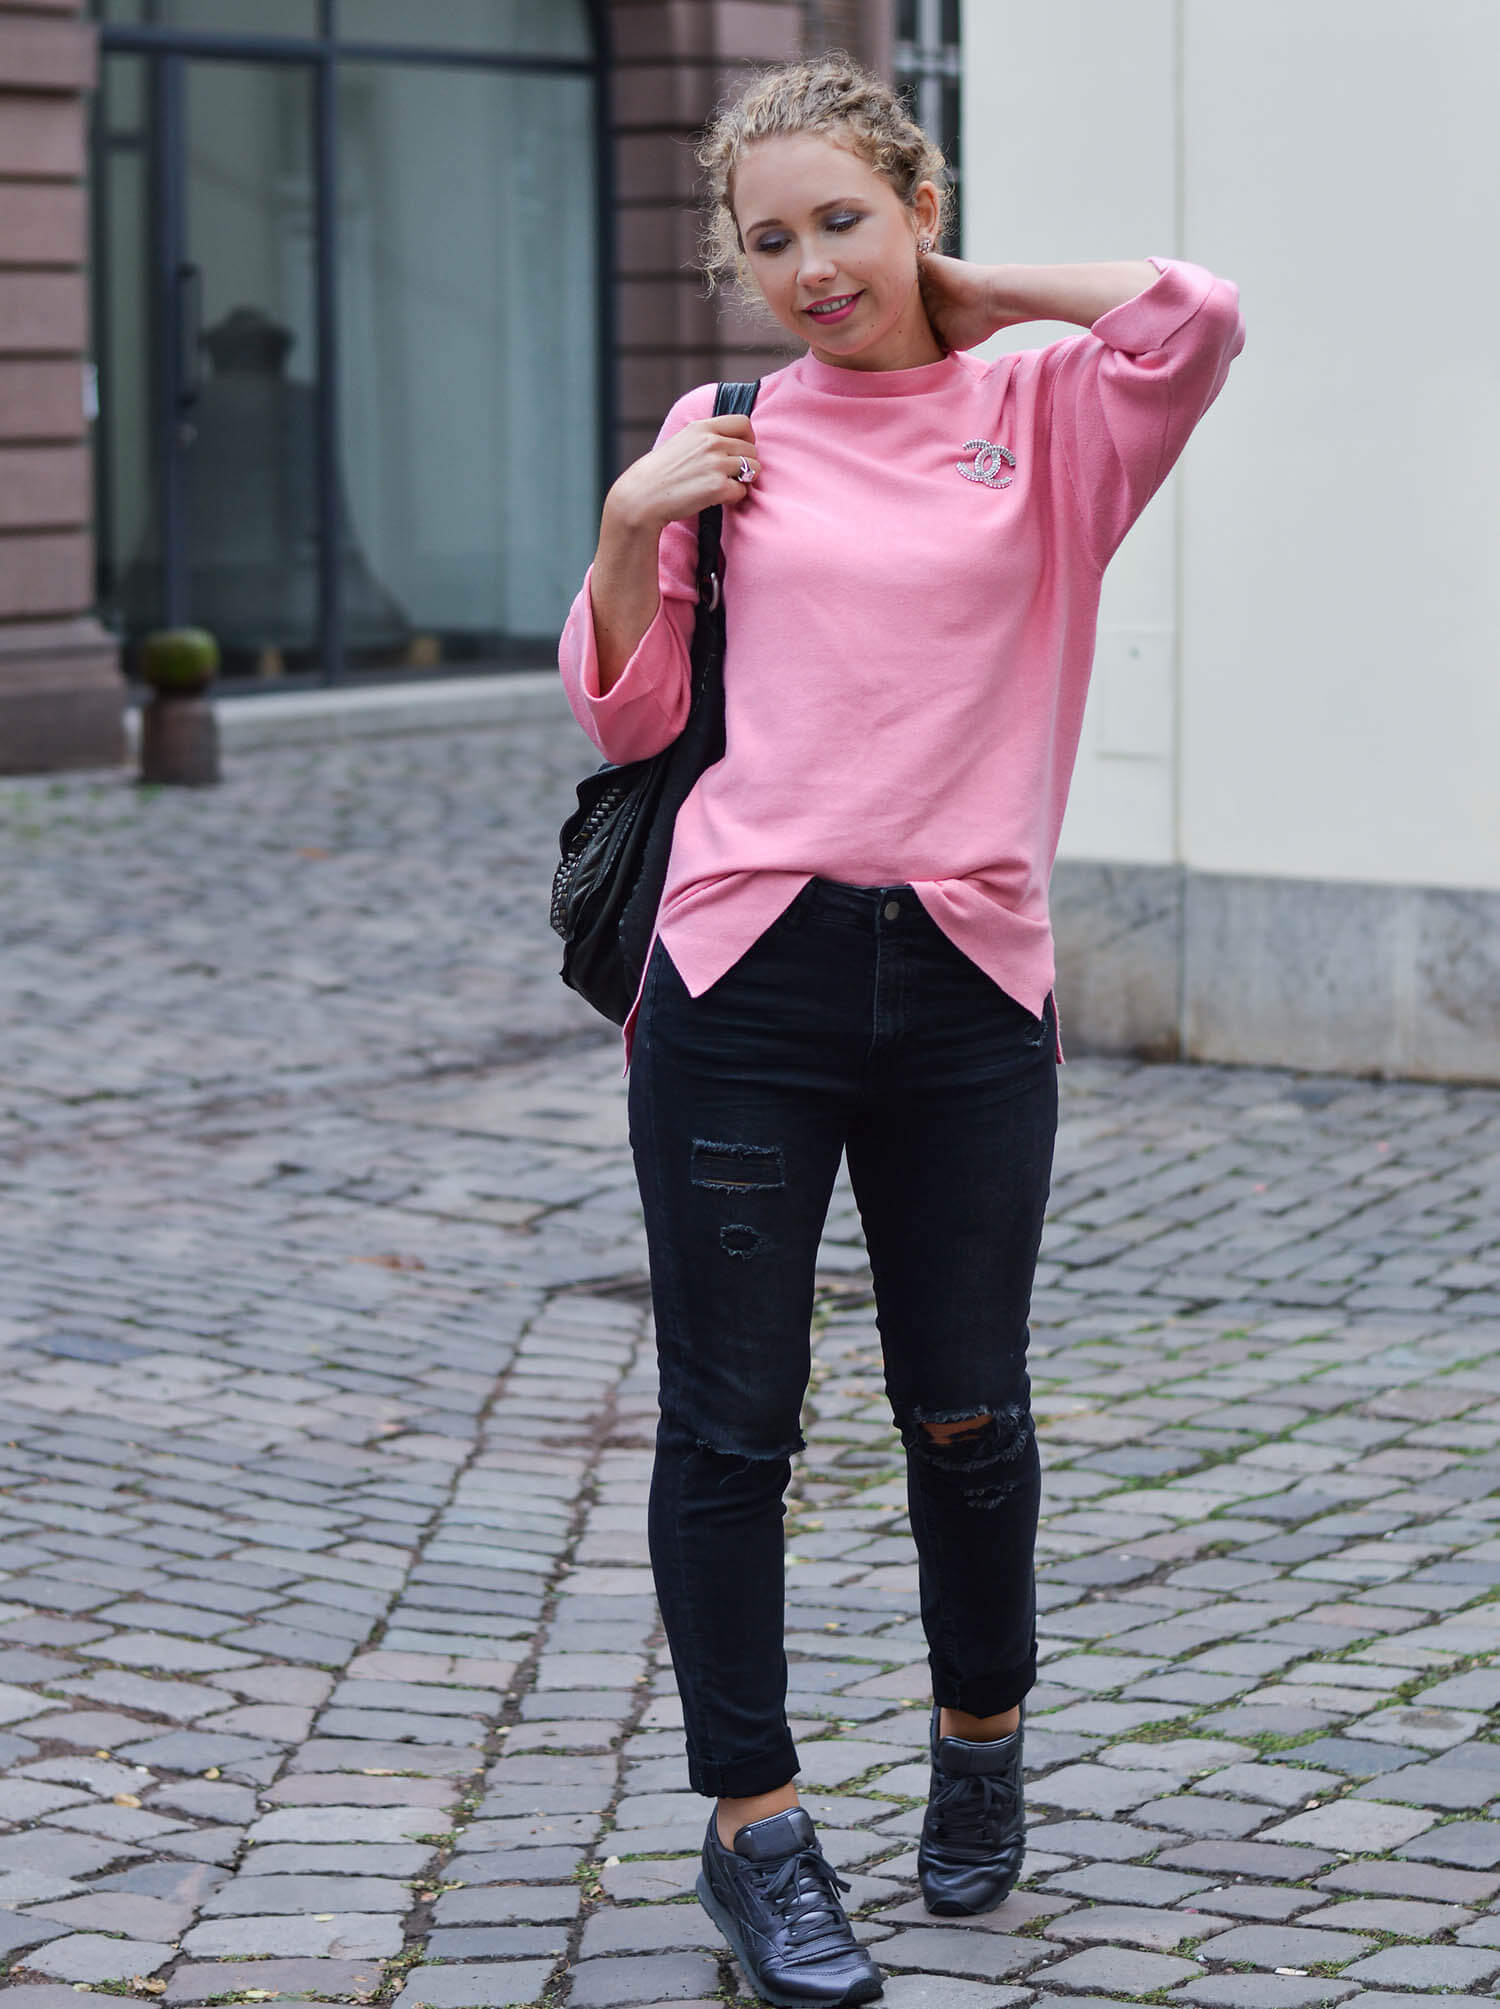 Kationette-fashionblog-nrw-Outfit-Casual-Weekend-Look-with-Pink-Sweater-Ripped-Jeans-Reebok-Sneaker